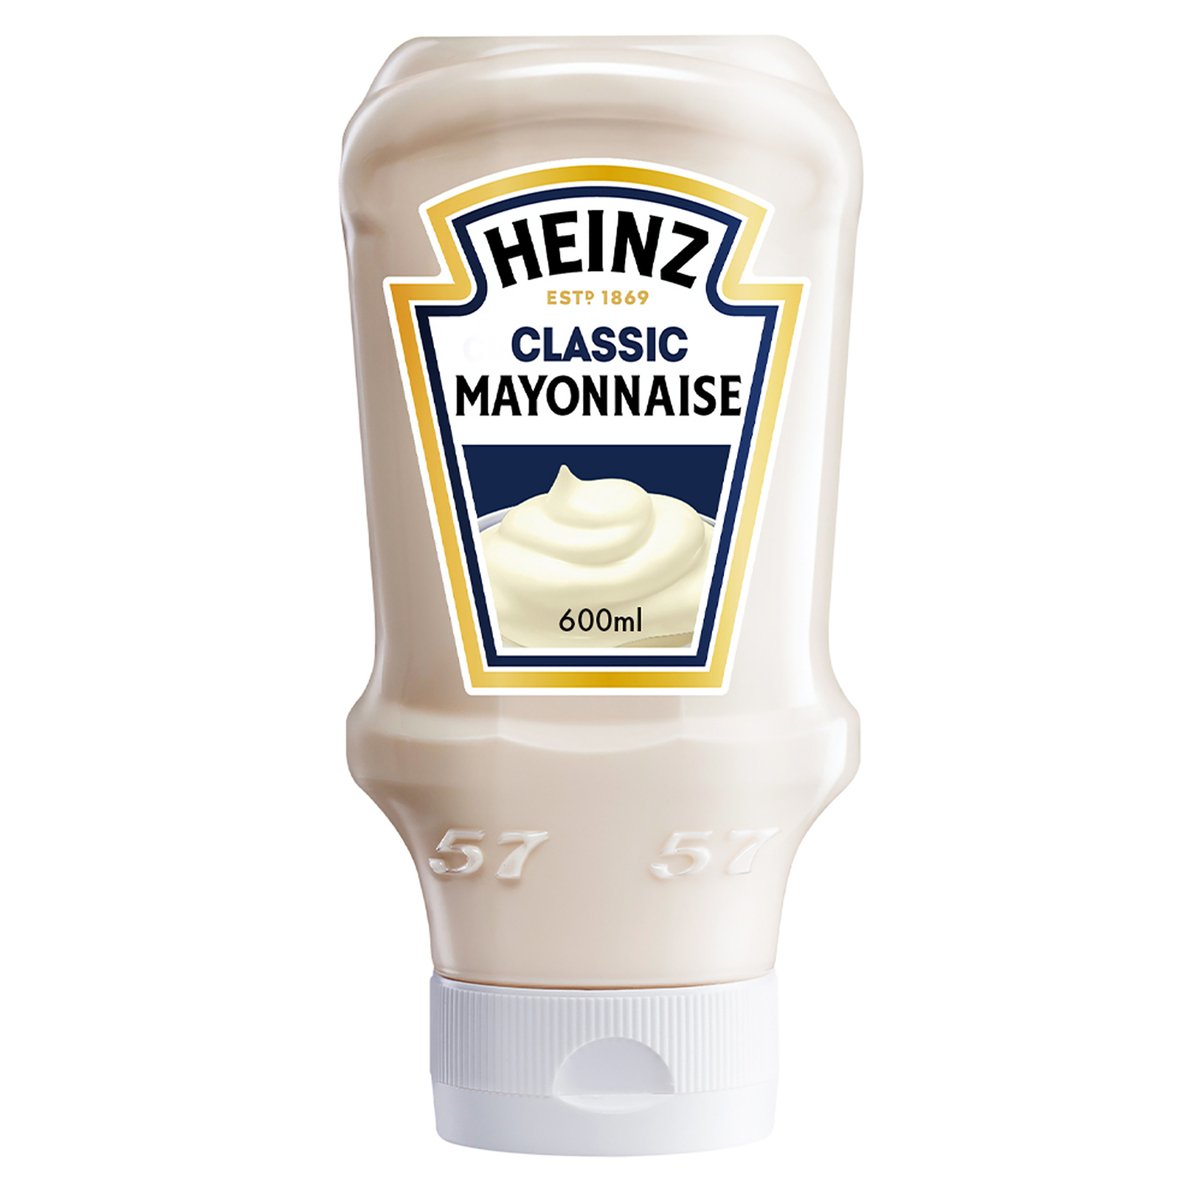 Heinz Creamy Classic Mayonnaise Top Down Squeezy Bottle 600ml